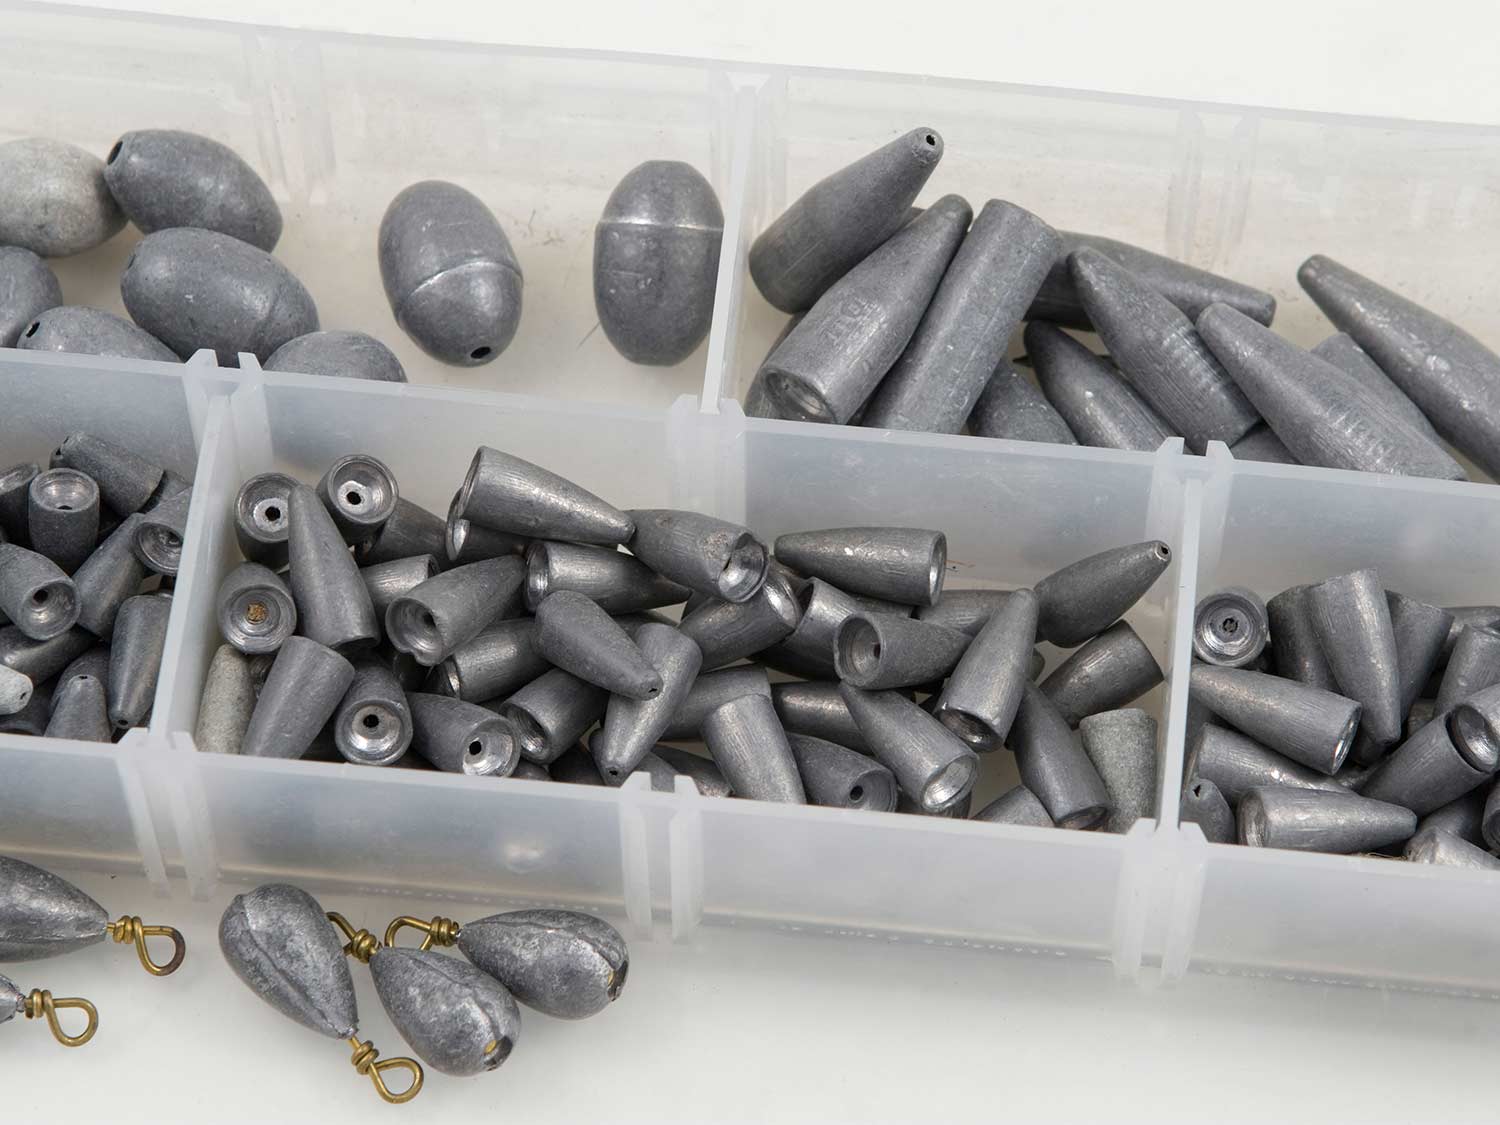 12 oz Bank Sinkers Lead Fishing Weights Free Shipping 7 Sinkers 